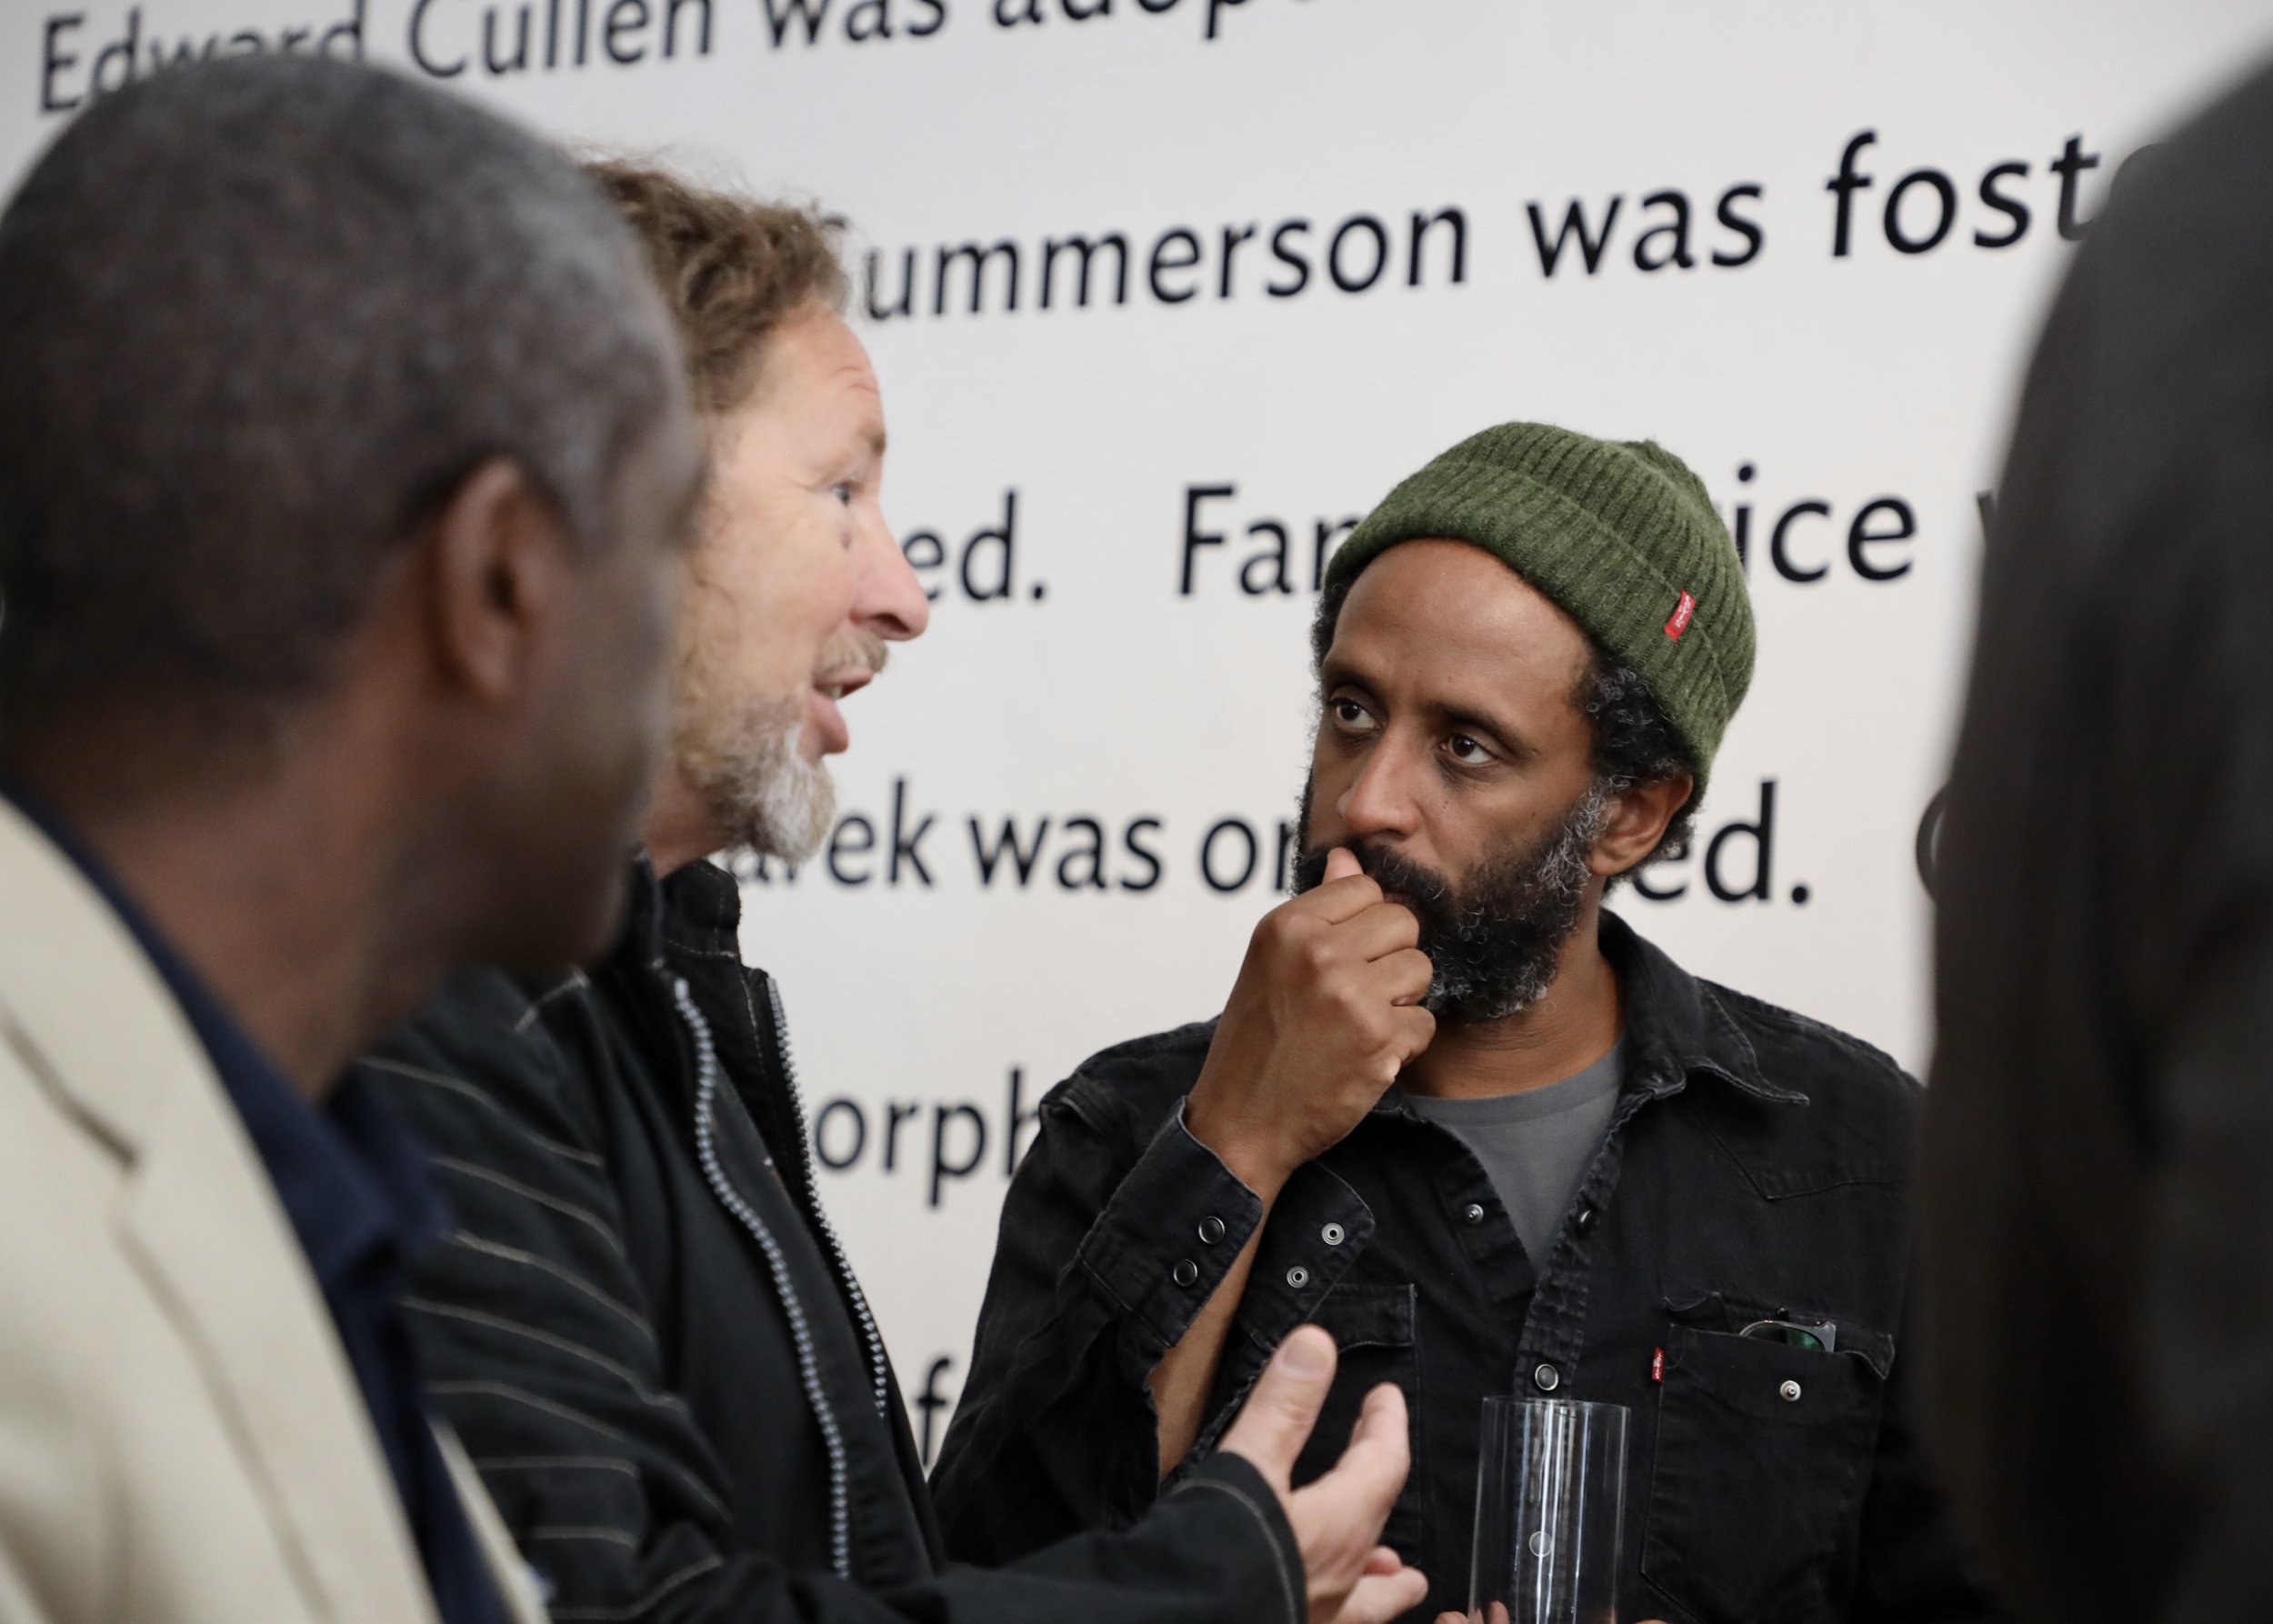 Bafta winning pupetter Marcus Clarke talks with Musician and songwriter (ELBOW) Pete Turner